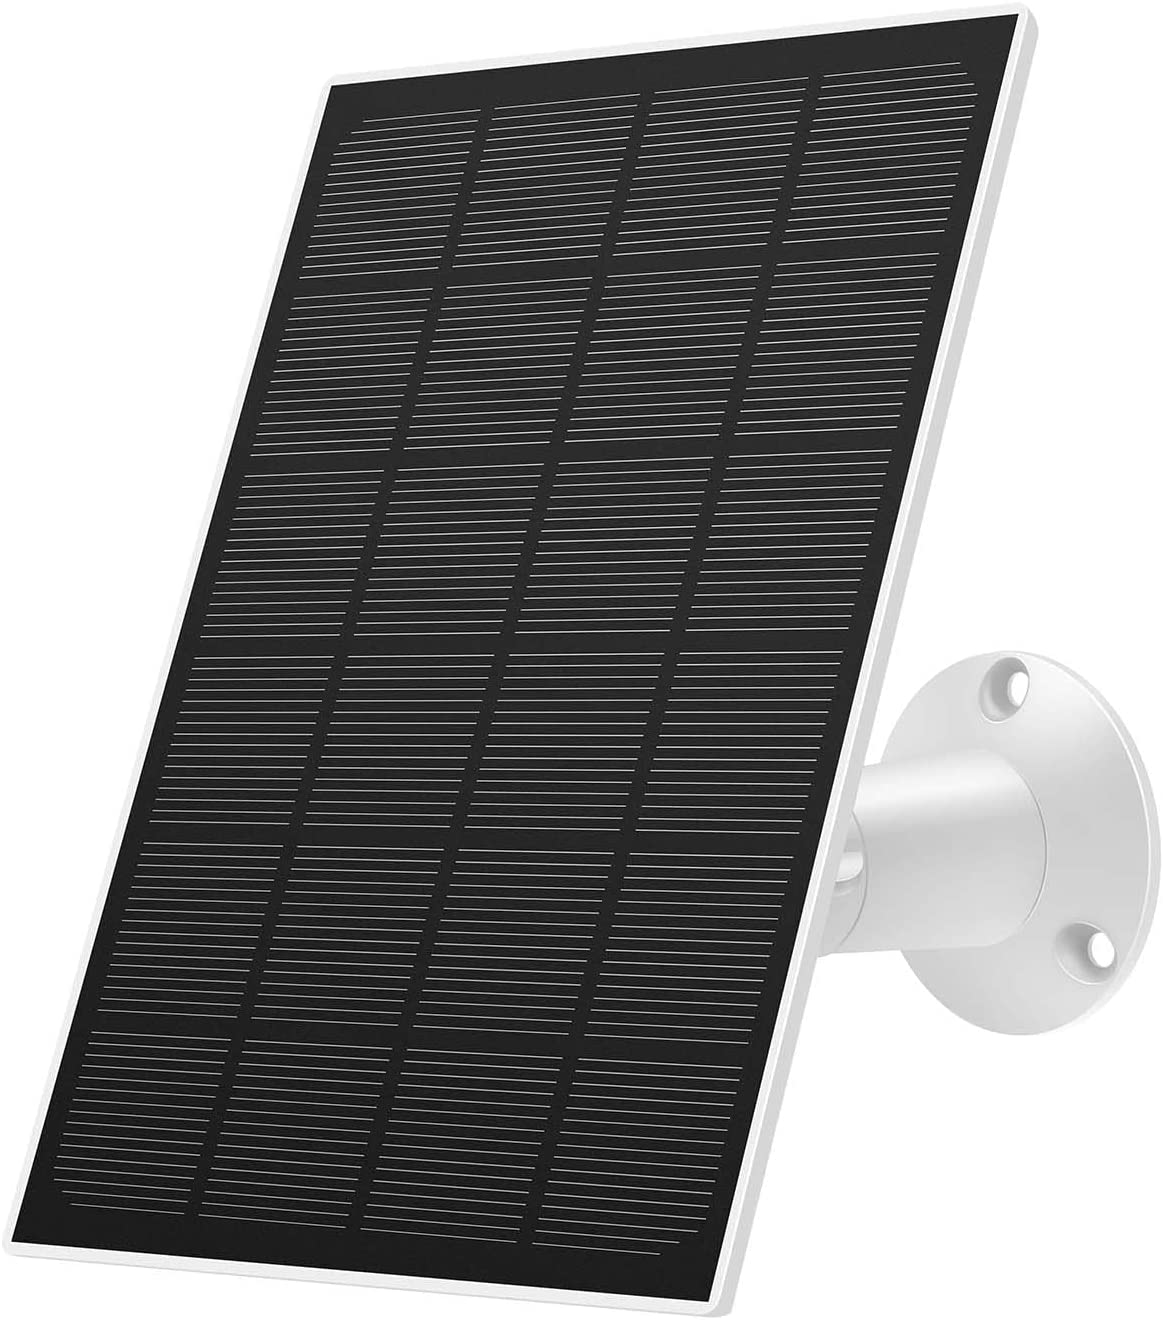 NETVUE Solar Panel for Outdoor Security Camera, USB Charger Solar Panel Compatible with Vigil Plus & Sentry Plus Wireless Security Camera，IP65 Waterproof, Continuously Charging, 360° Swivel Bracket